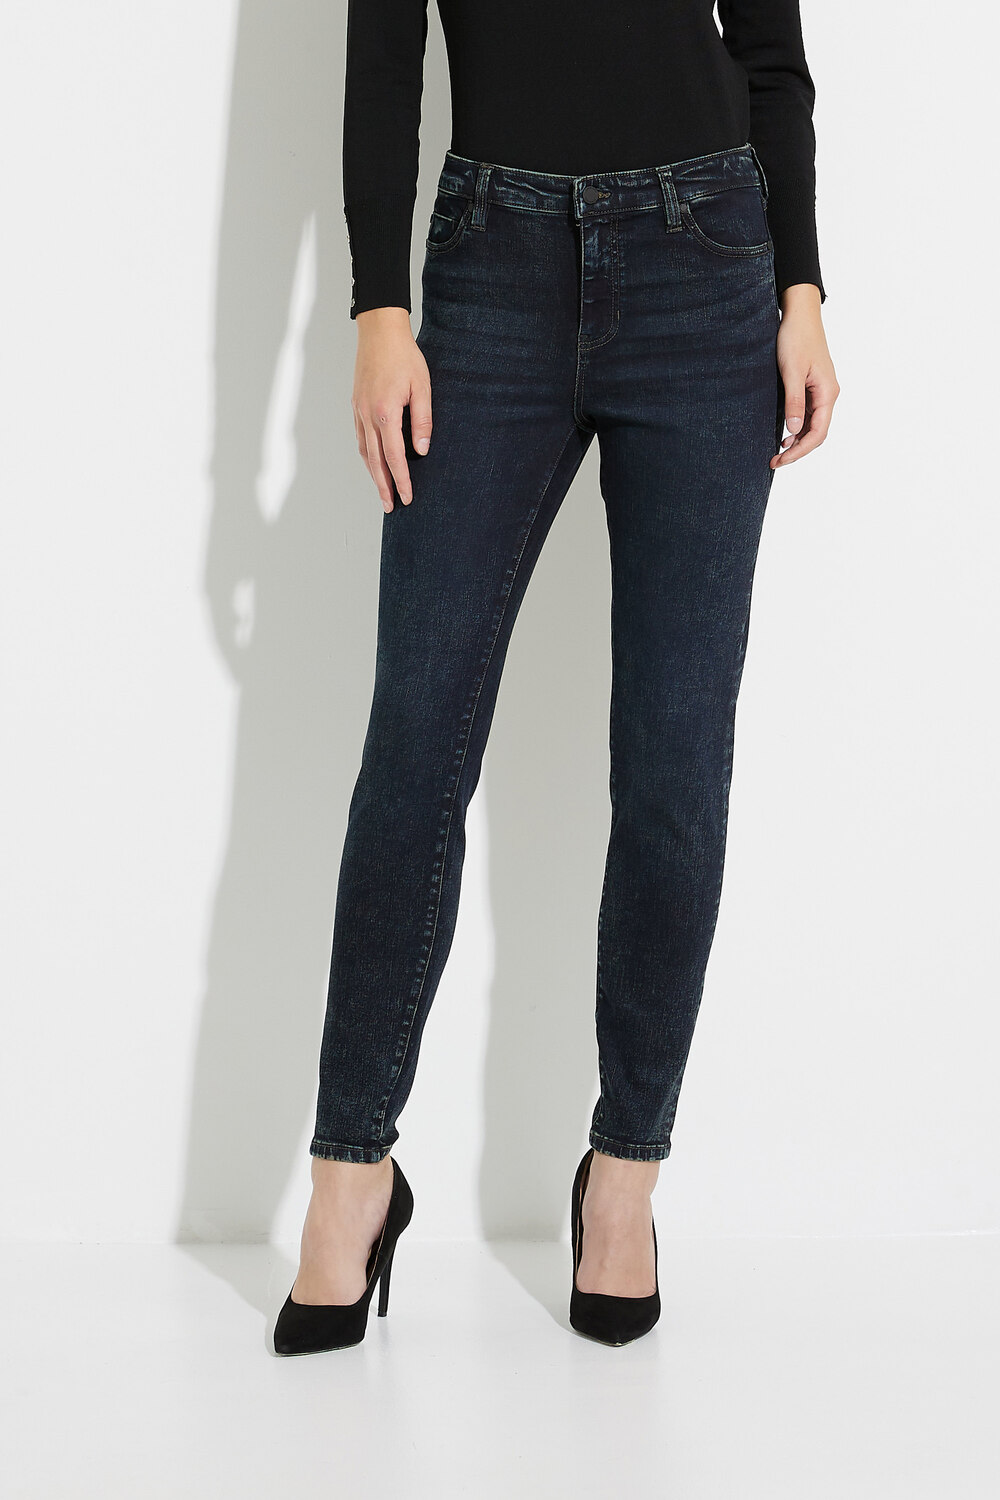 High-Rise Skinny Jeans Style LM2000EW. Yellowstone